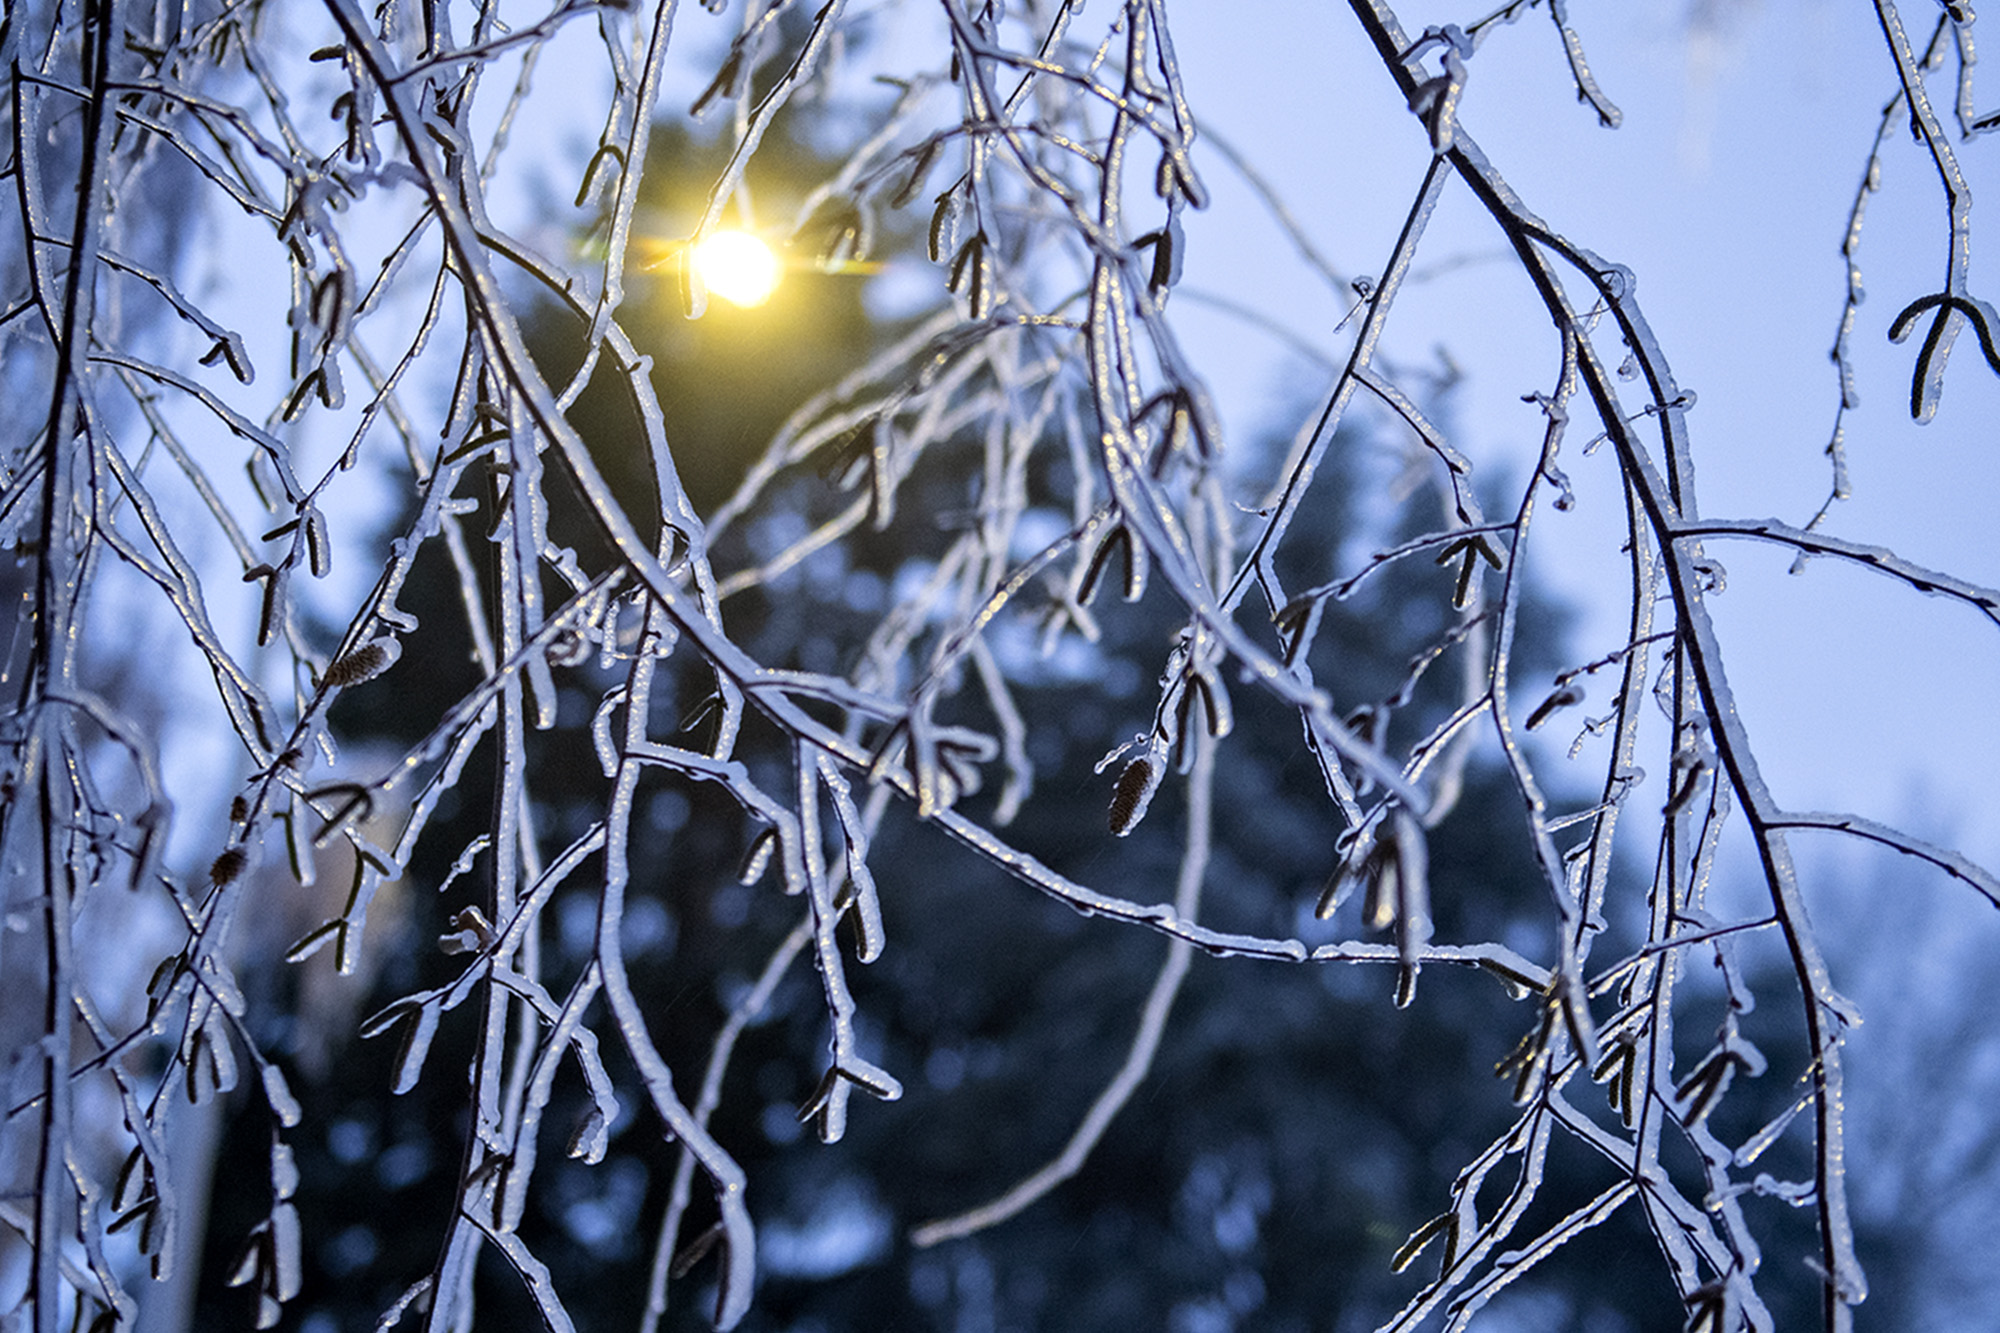 A streetlight illuminates an icy tree in southeast Vancouver on Friday morning, Dec. 23, 2022.